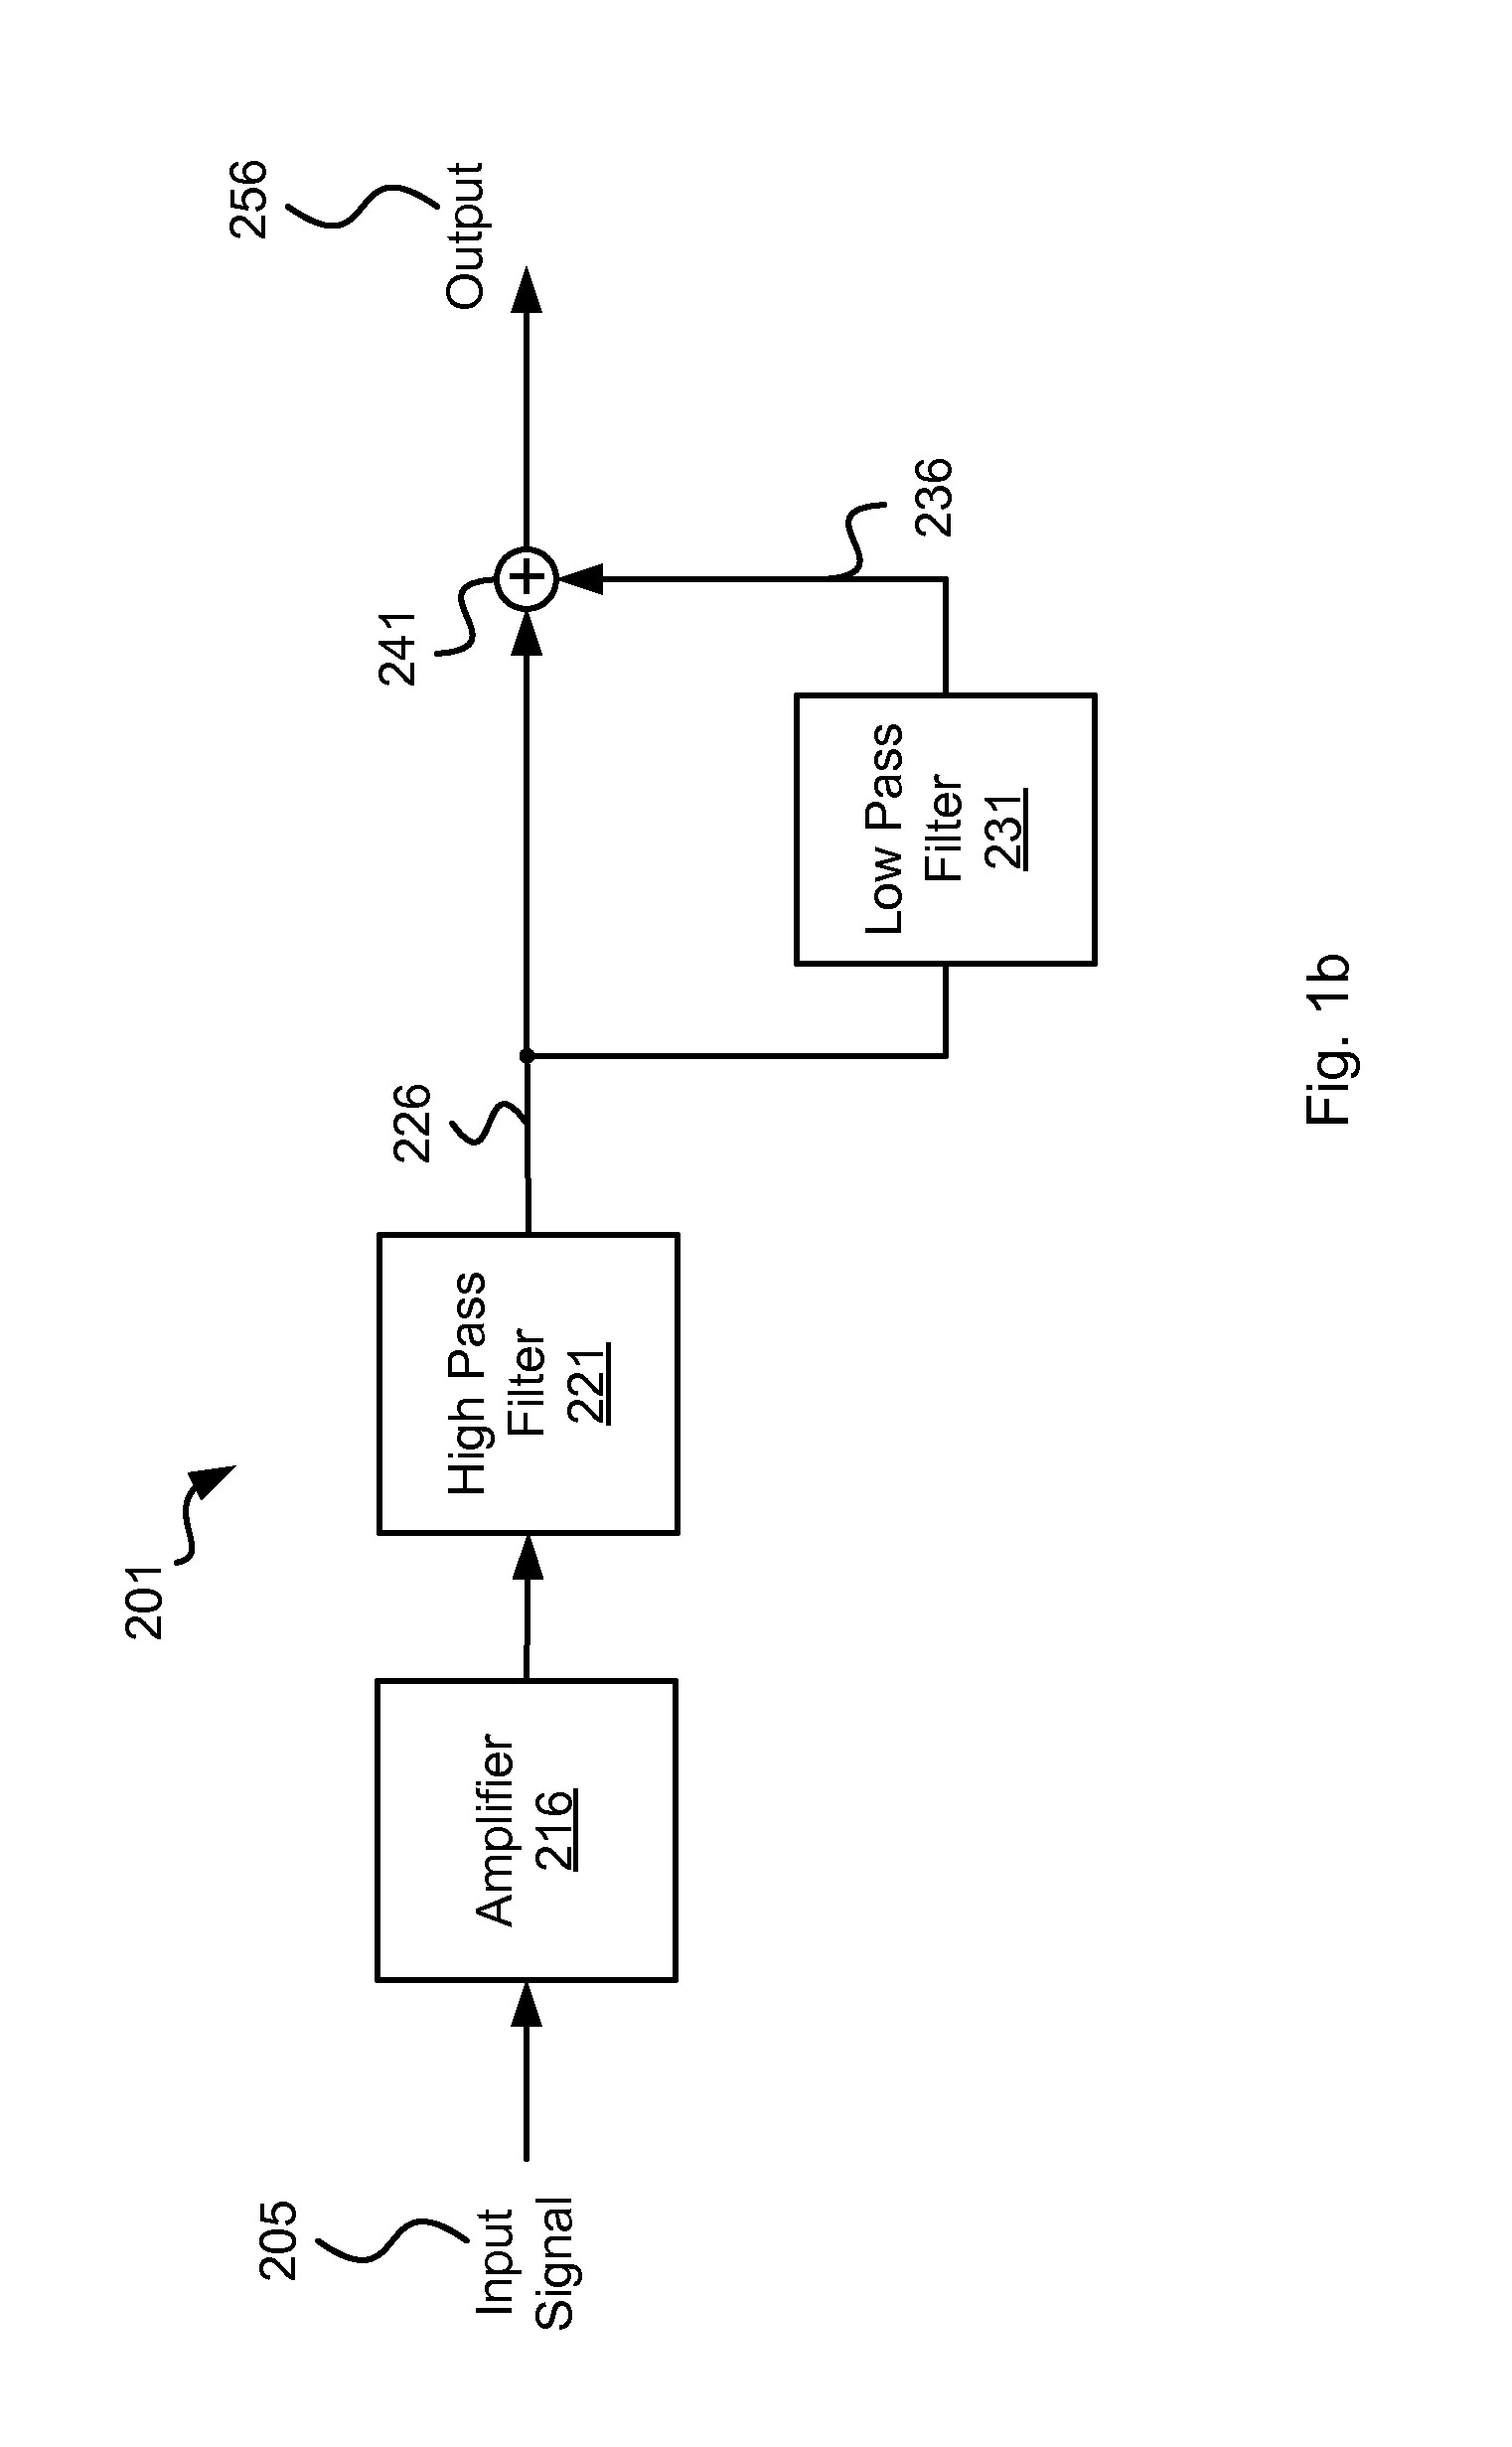 Systems and Methods for Reducing Low Frequency Loss in a Magnetic Storage Device